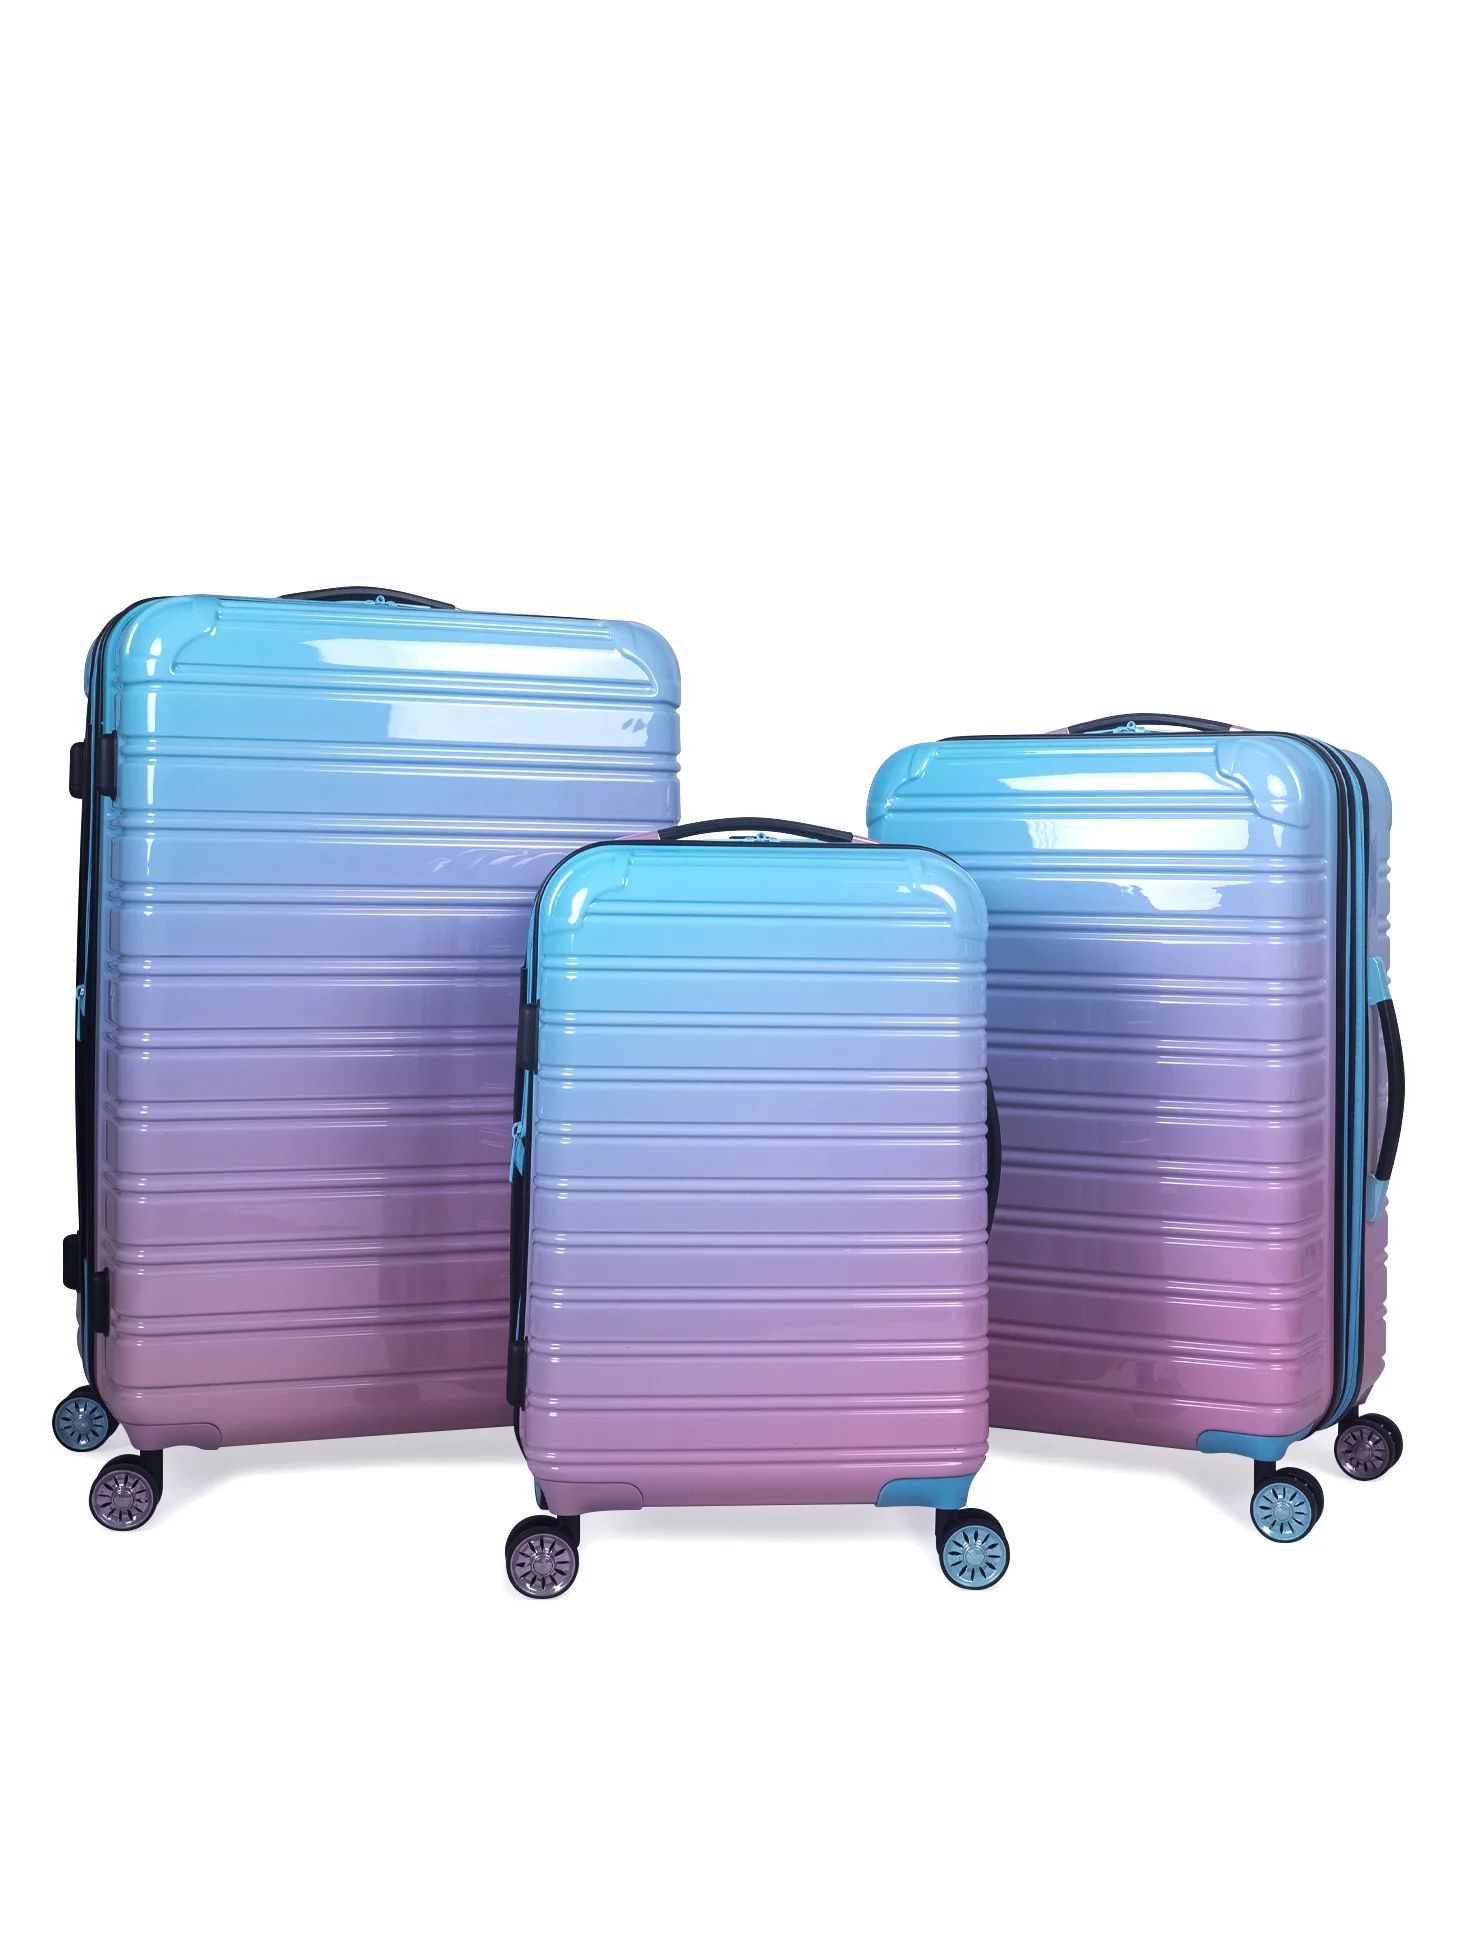 iFLY Hardside Luggage Fibertech 3 Piece Set, 20" Carry-On Luggage, 24" Checked Luggage and 28" Ch... | Walmart (US)